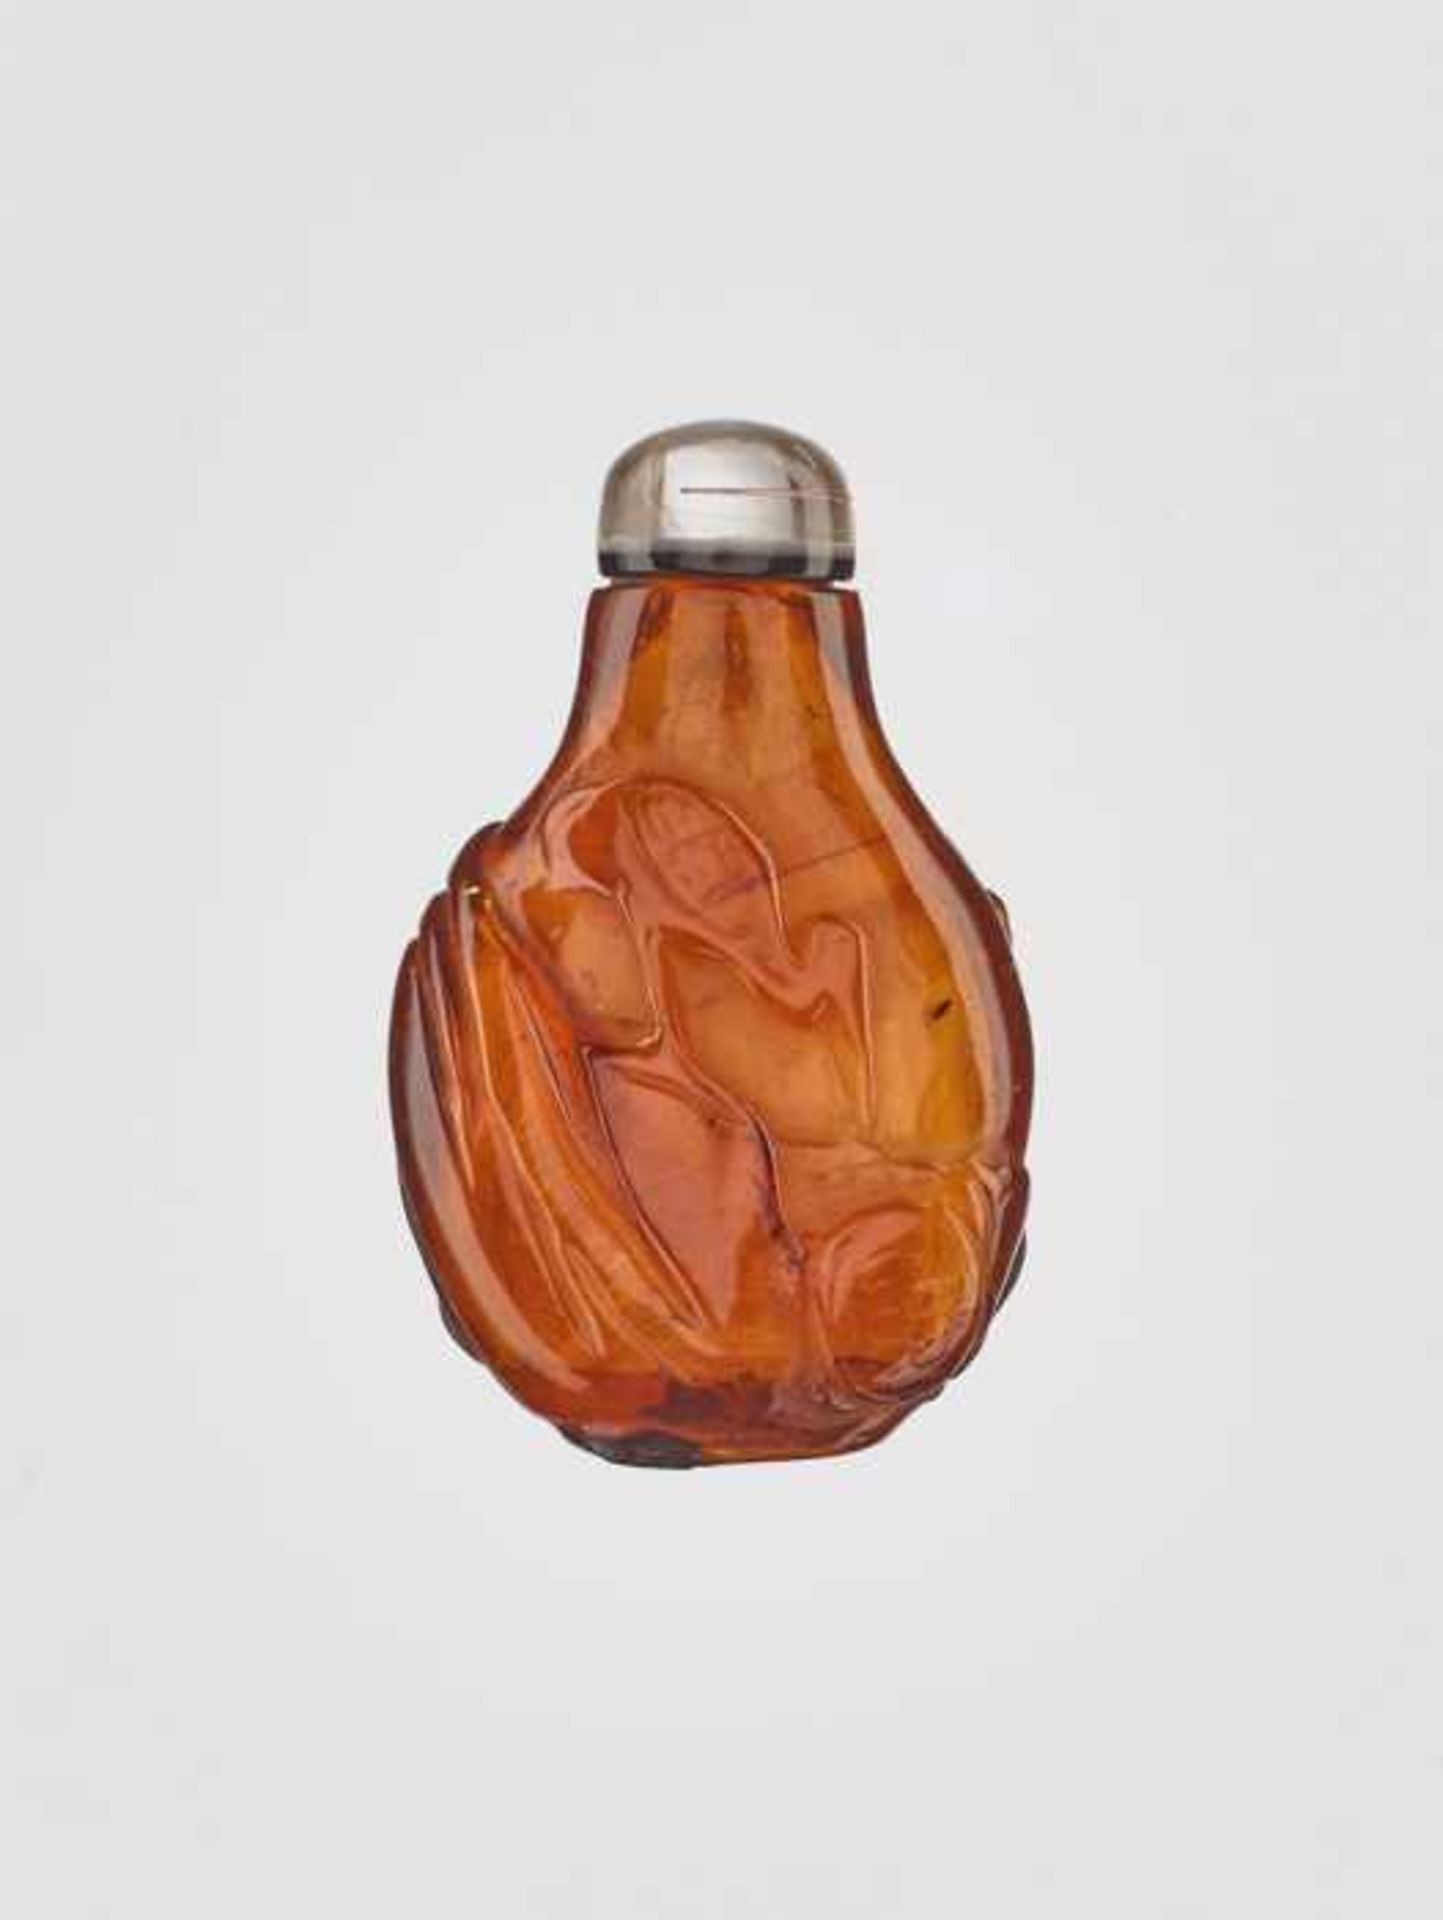 A MINIATURE AMBER ‘FISHERMAN’ SNUFF BOTTLE, EARLY 19th CENTURY Transparent amber of untreated - Image 2 of 6